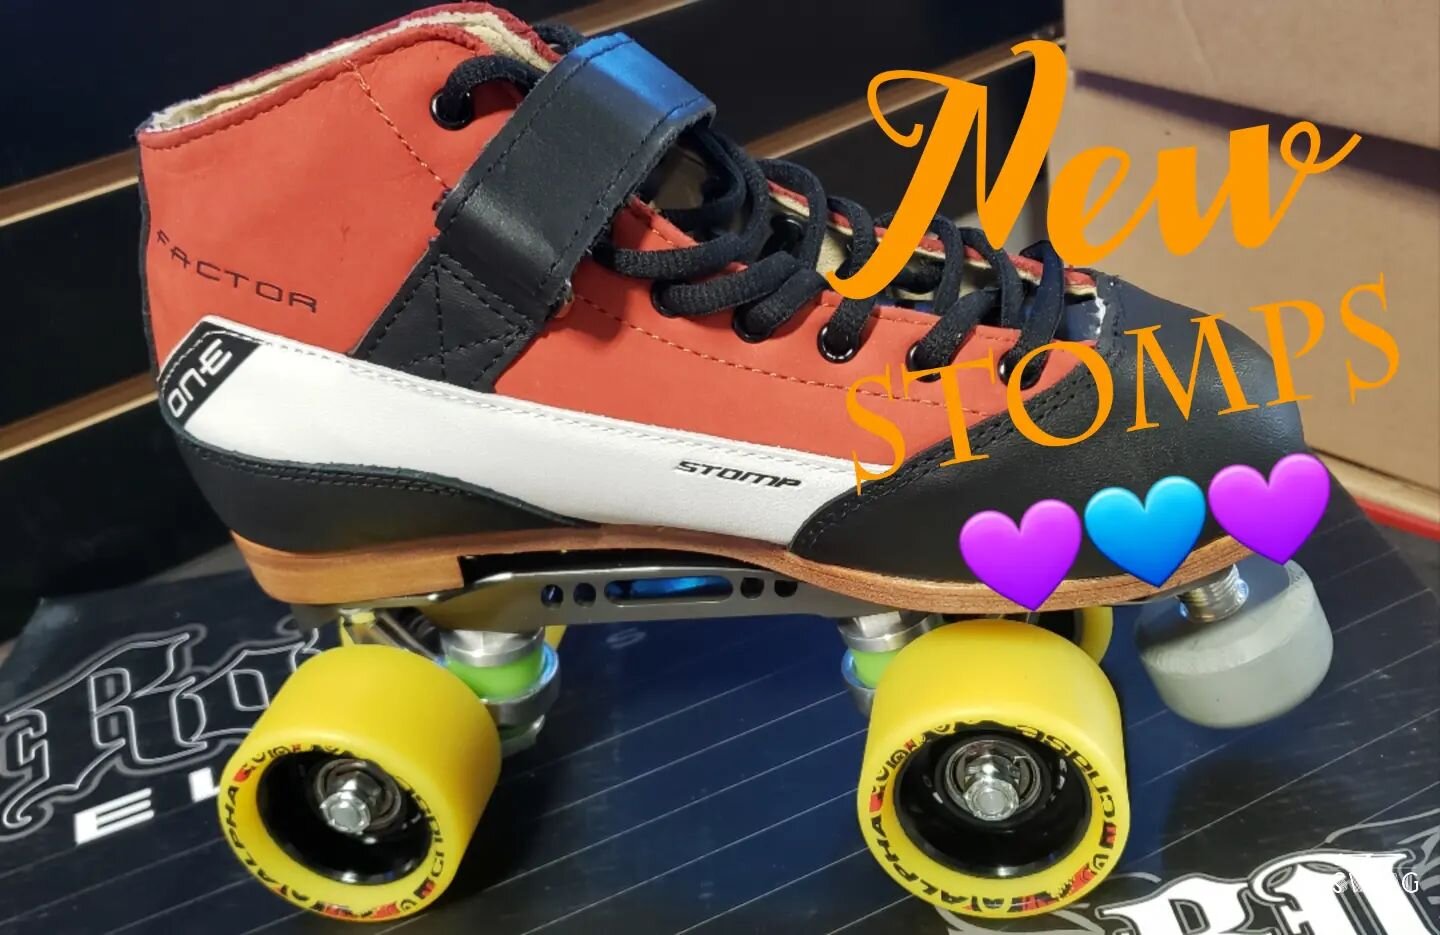 Roller Derby Elite Stomp Factor One

Had to get them to see what the hype was about and I do love these skates!

Long time Riedell skater, so I'm very happy to see other companies putting out quality skates.

#rollerskating #rollerderby #rollerskates